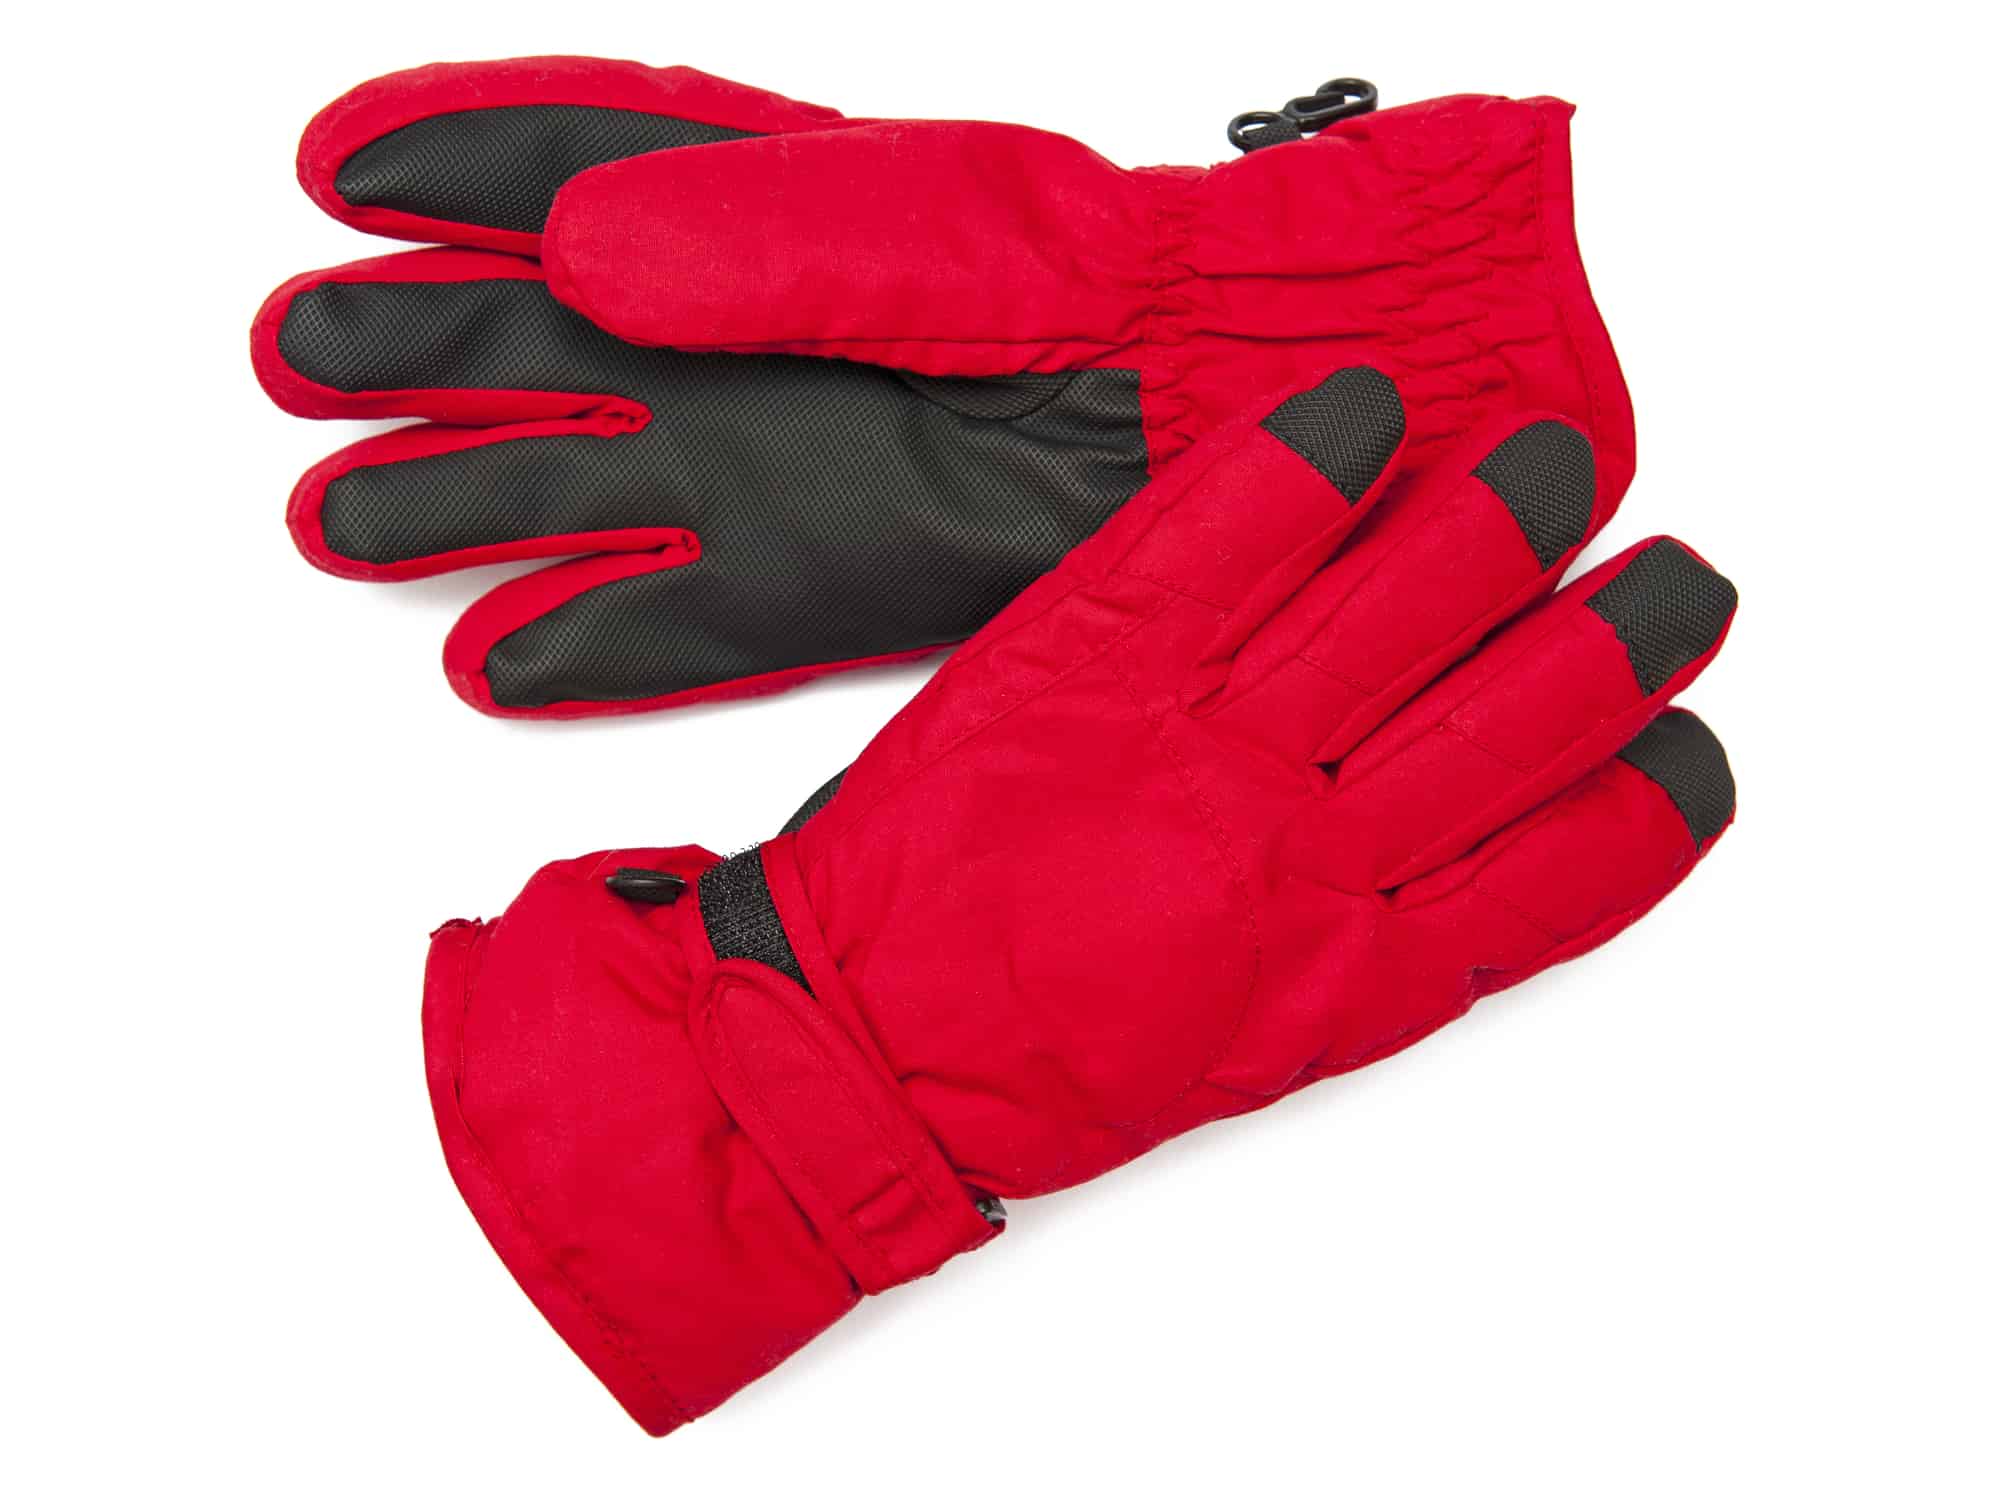 Red Winter gloves with insulation for winter hiking